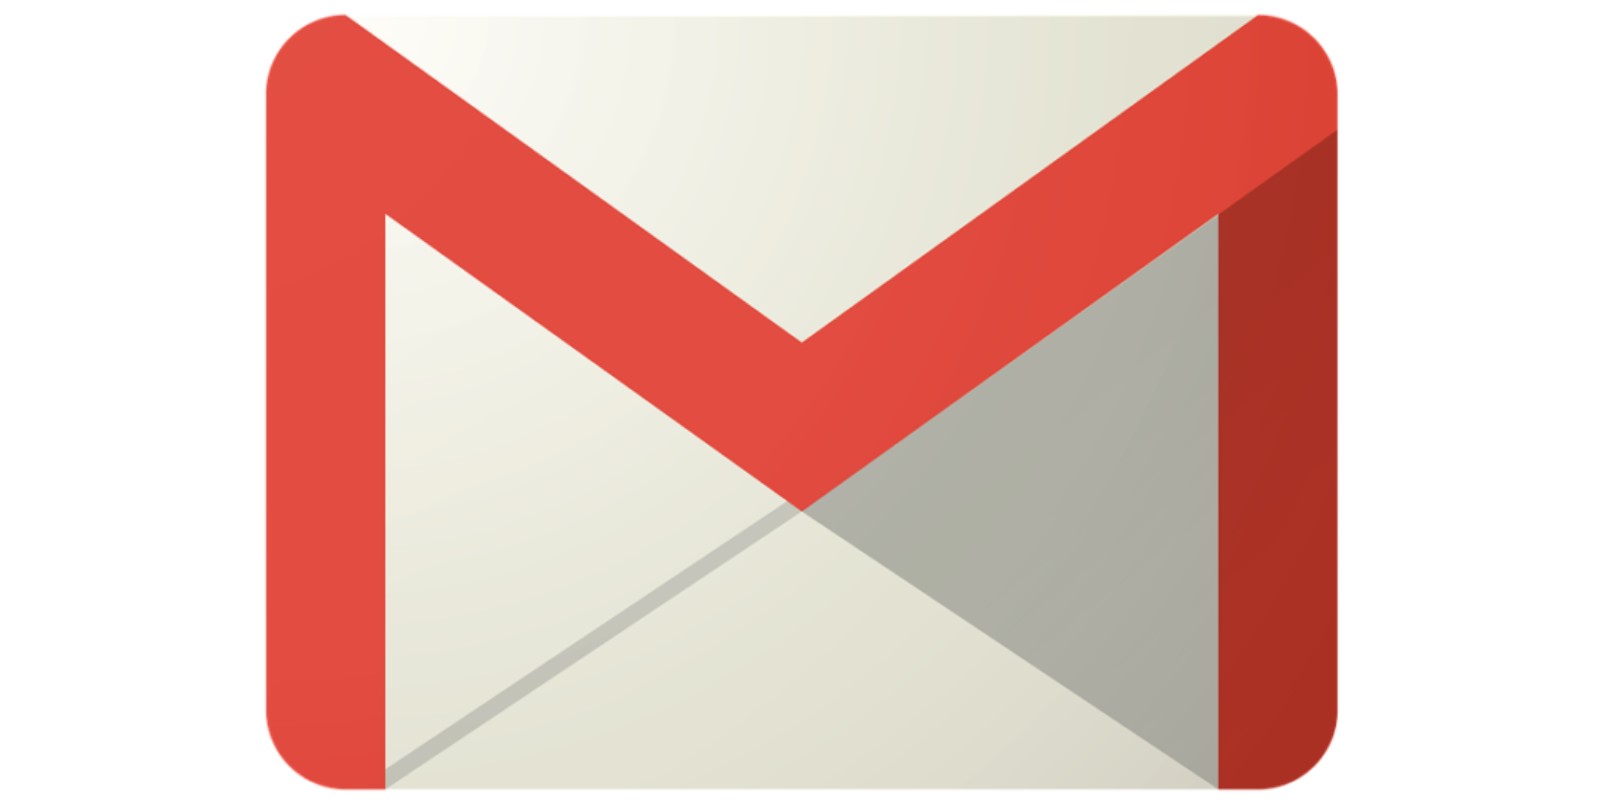 Gmail Customer Service: Phone Number, Contact And Support Email